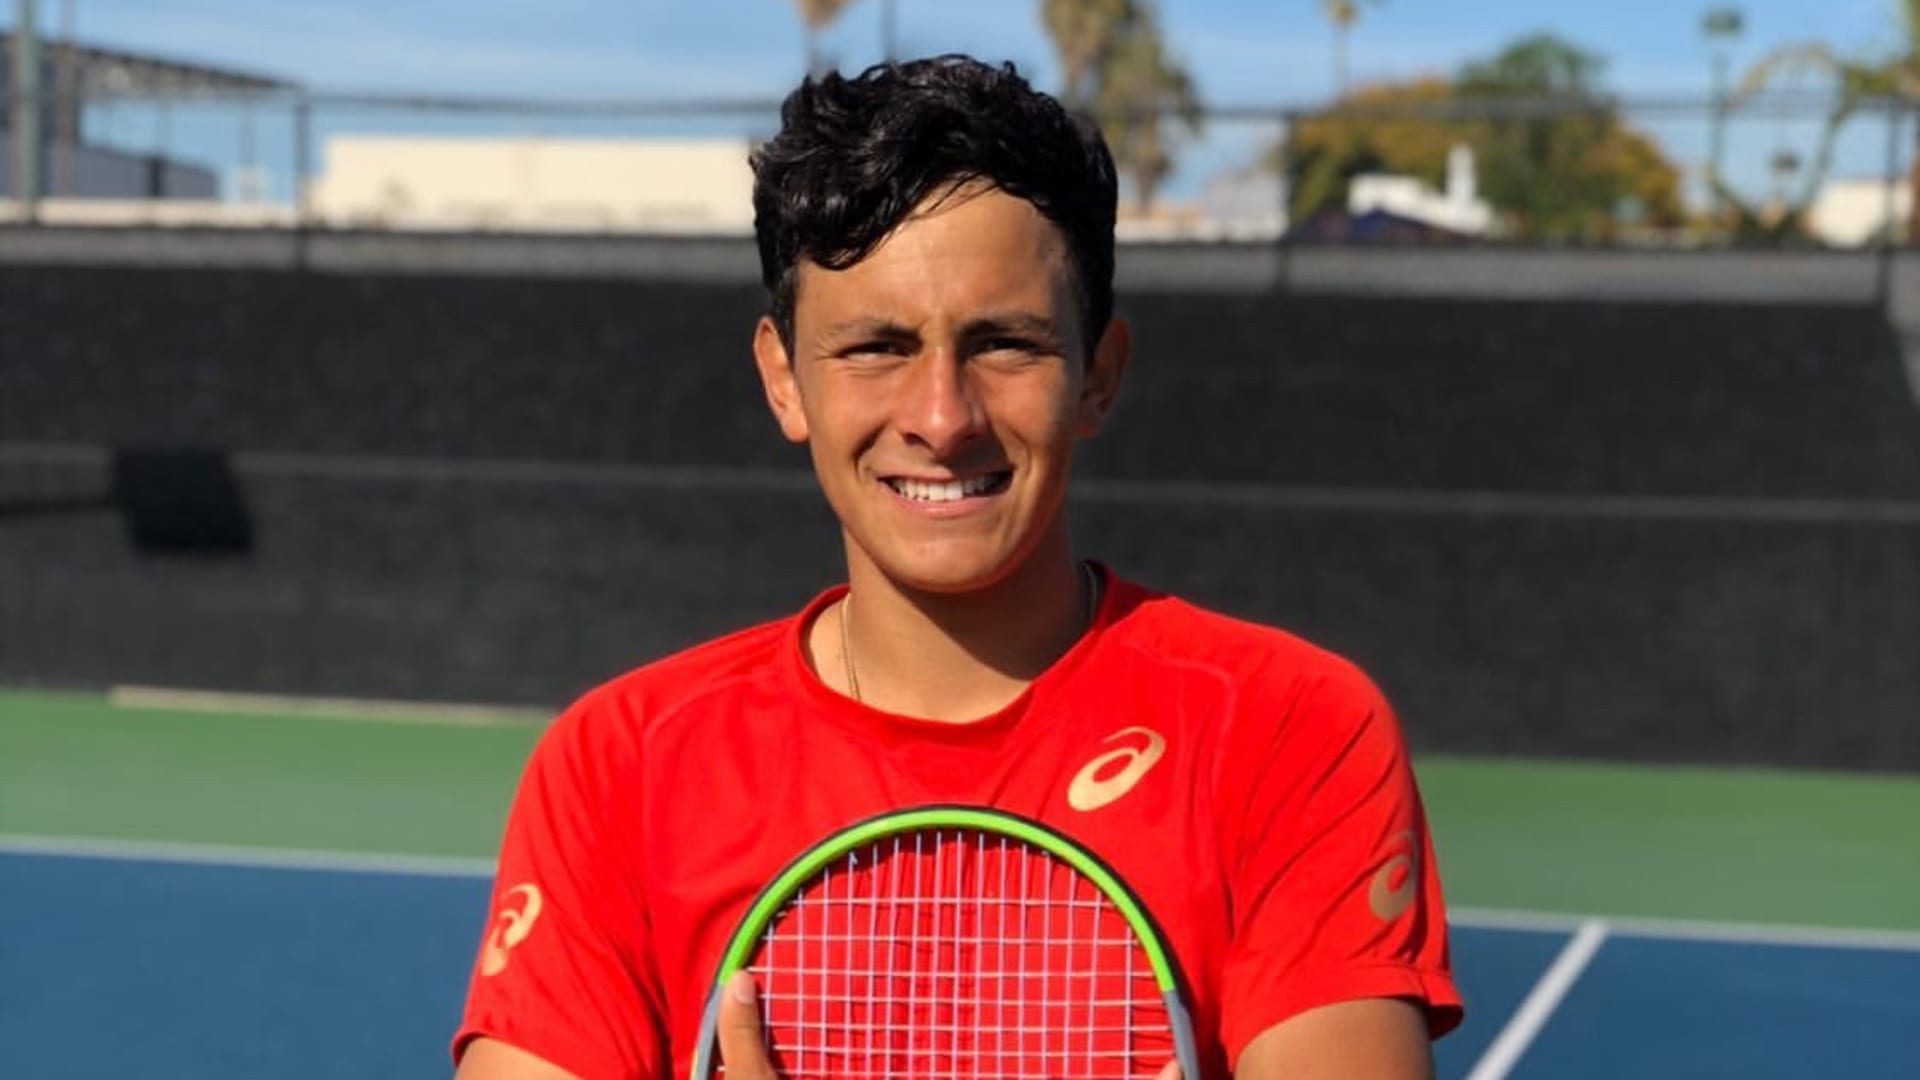 TENNIS Podcast Emilio Nava on leaping from juniors to the pros